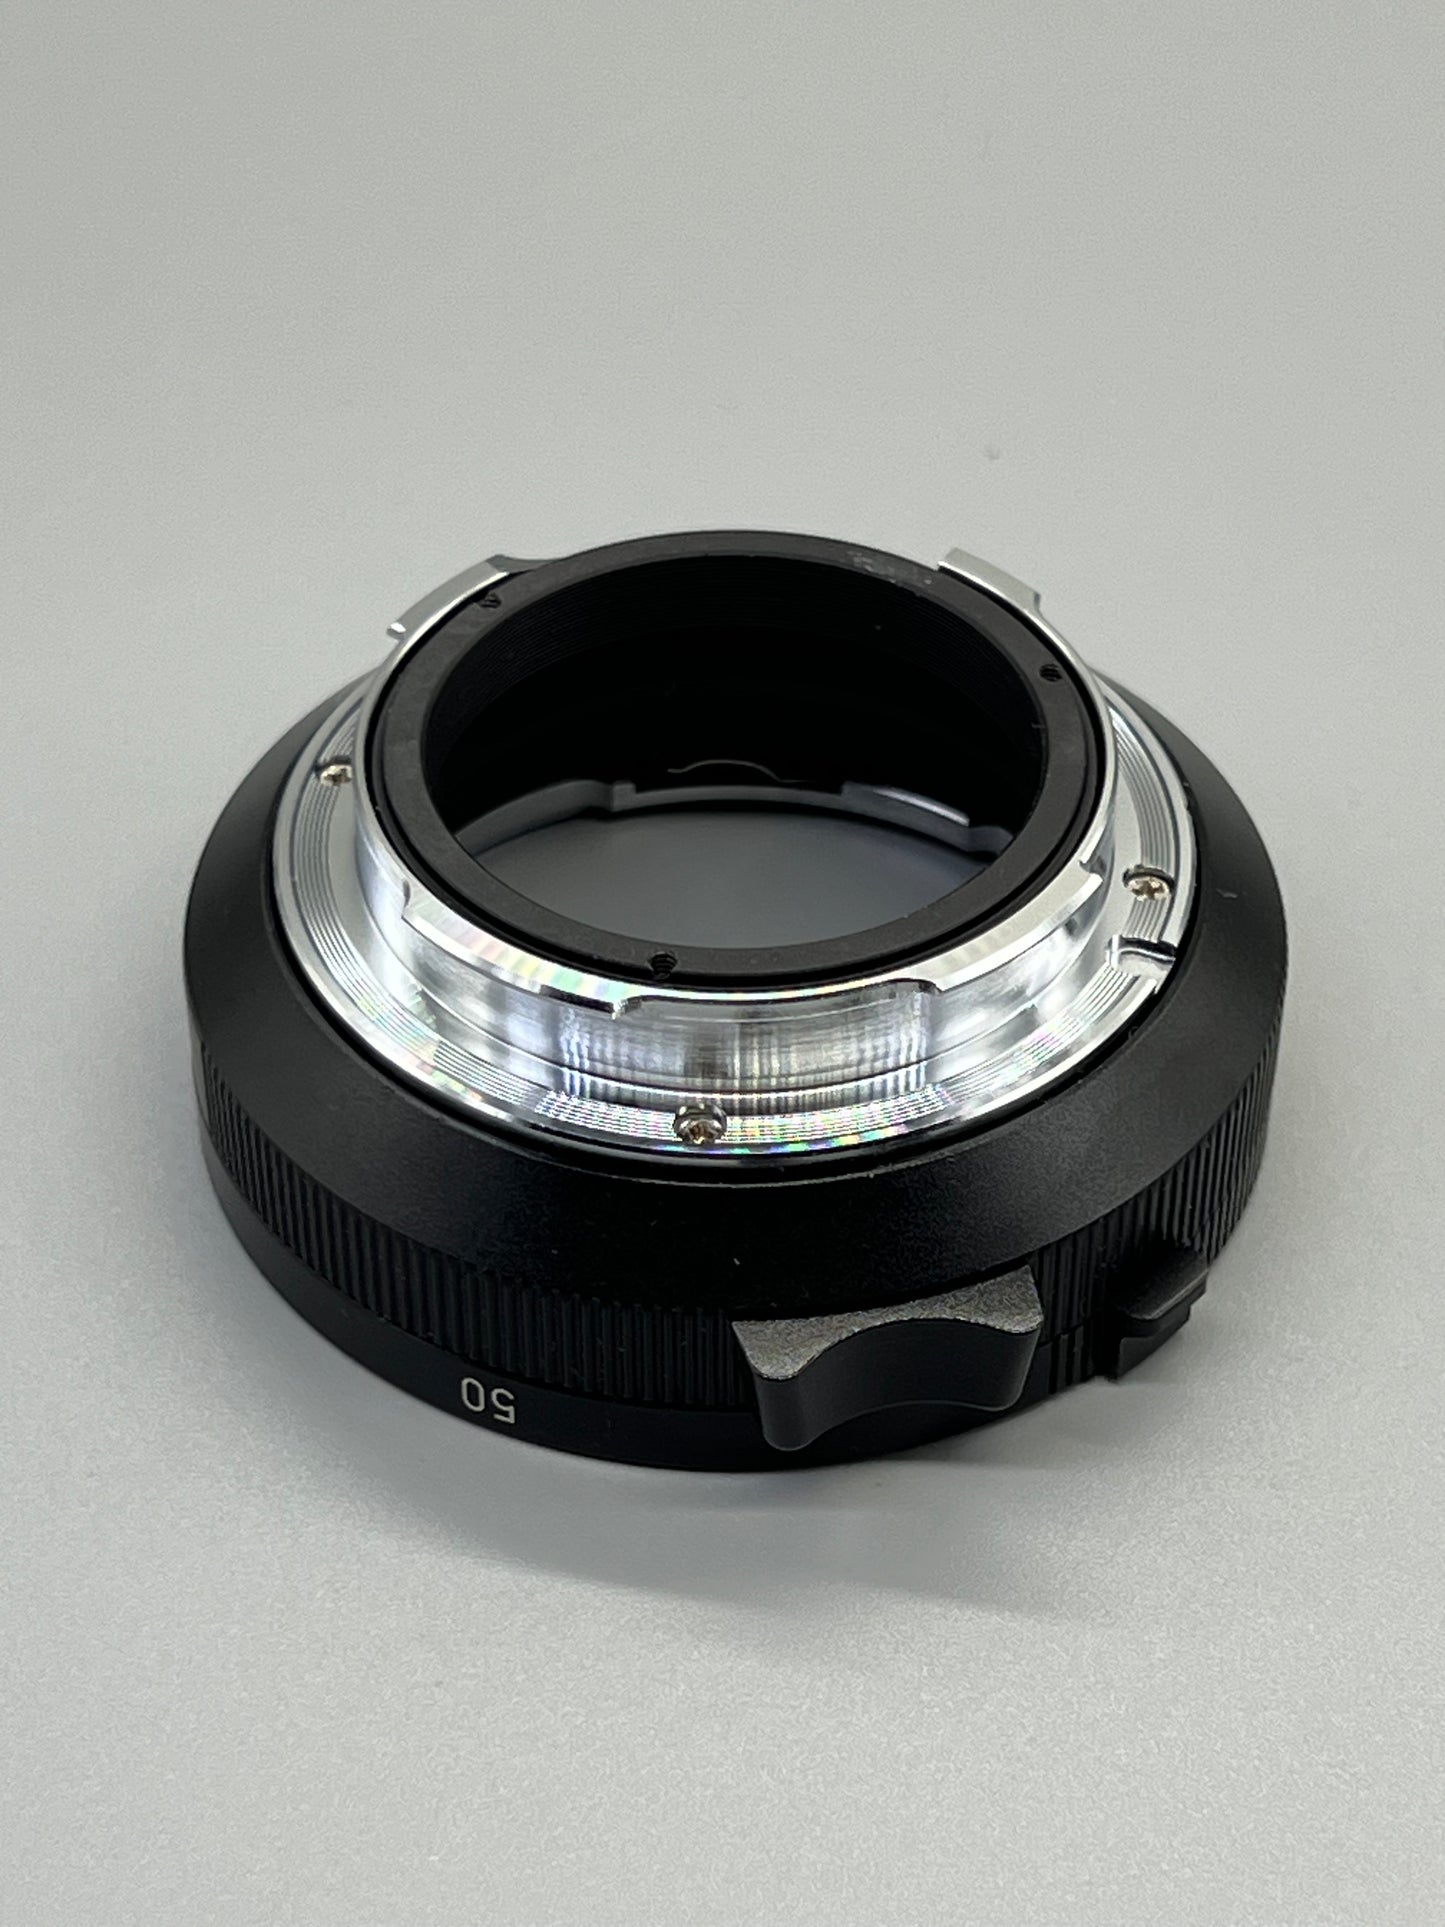 coupled PK-LM（Version 1.5） R50 rangefinder-link adapter CY mount lens to Leica M camera